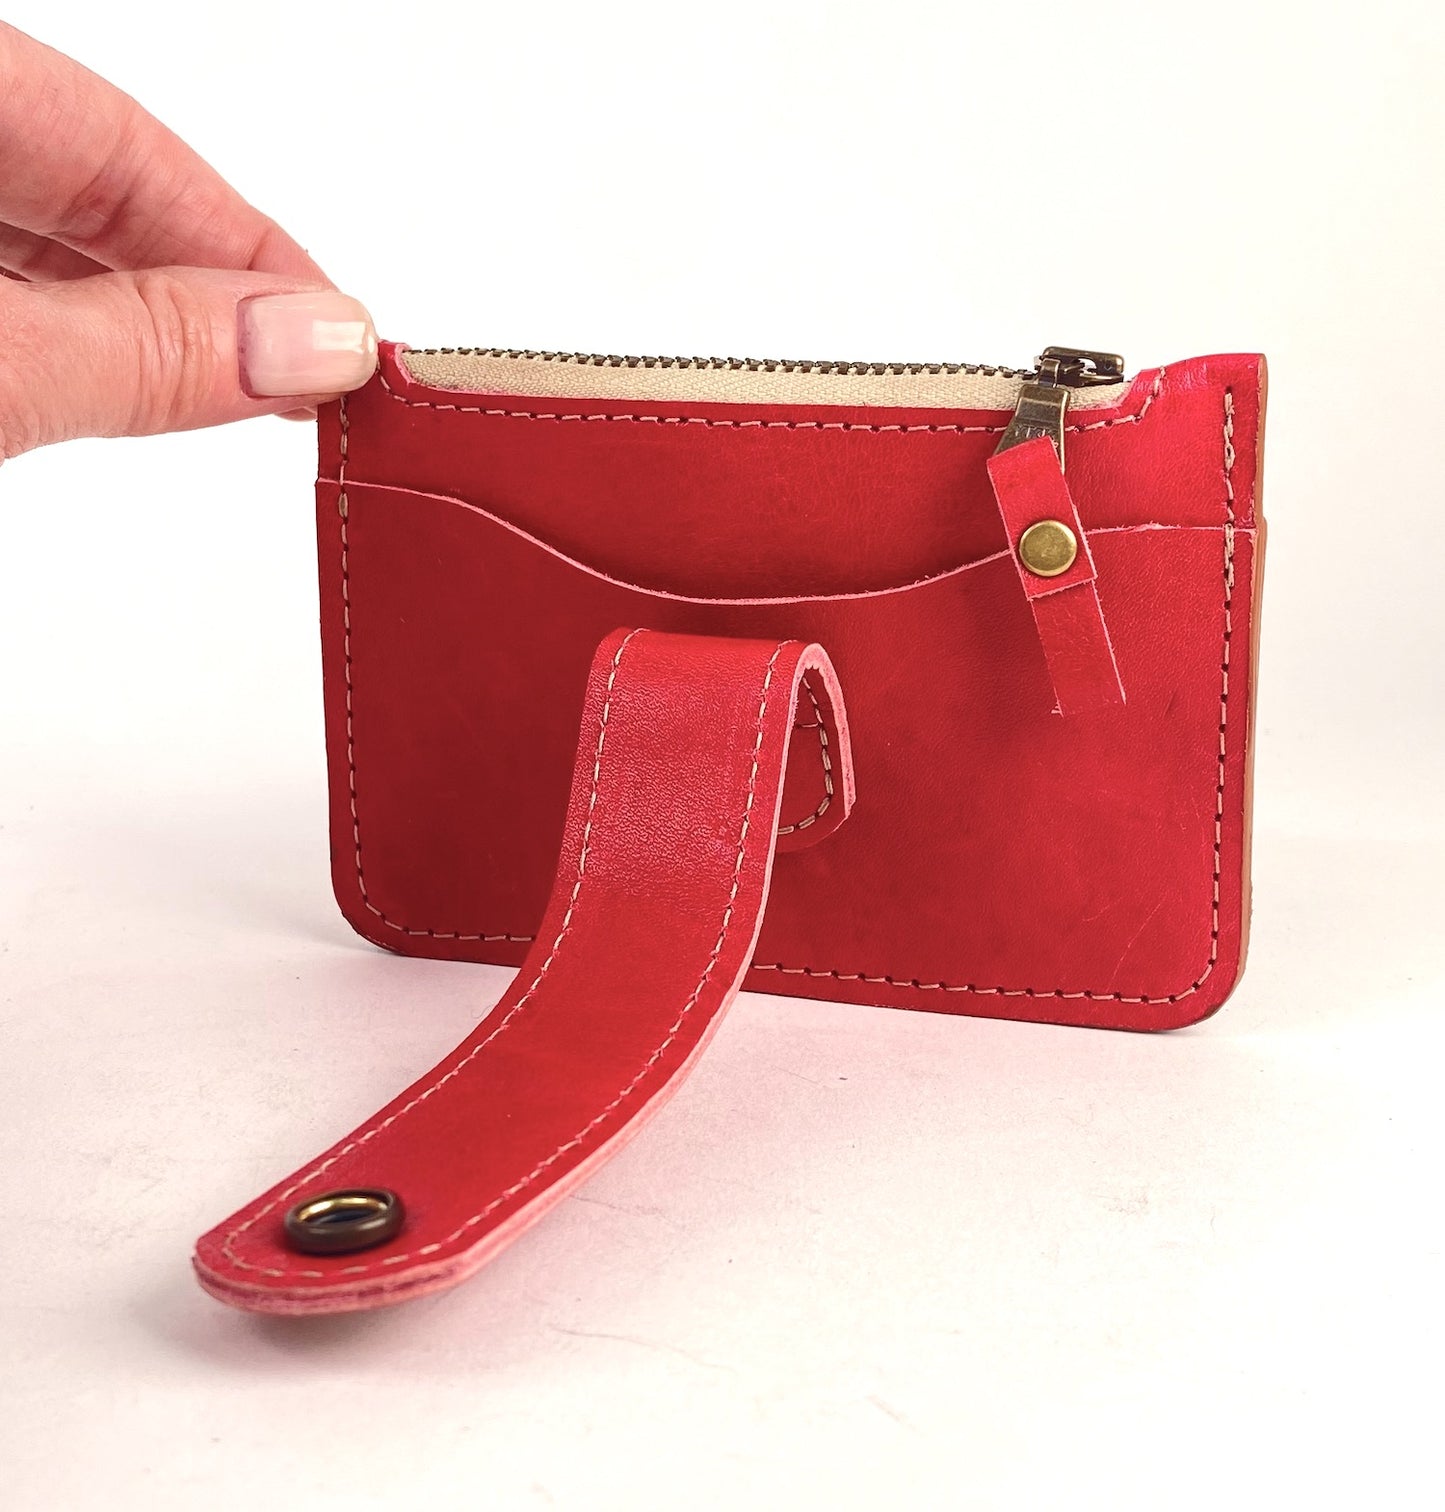 CardGuard Minimalist Leather Wallet in Red